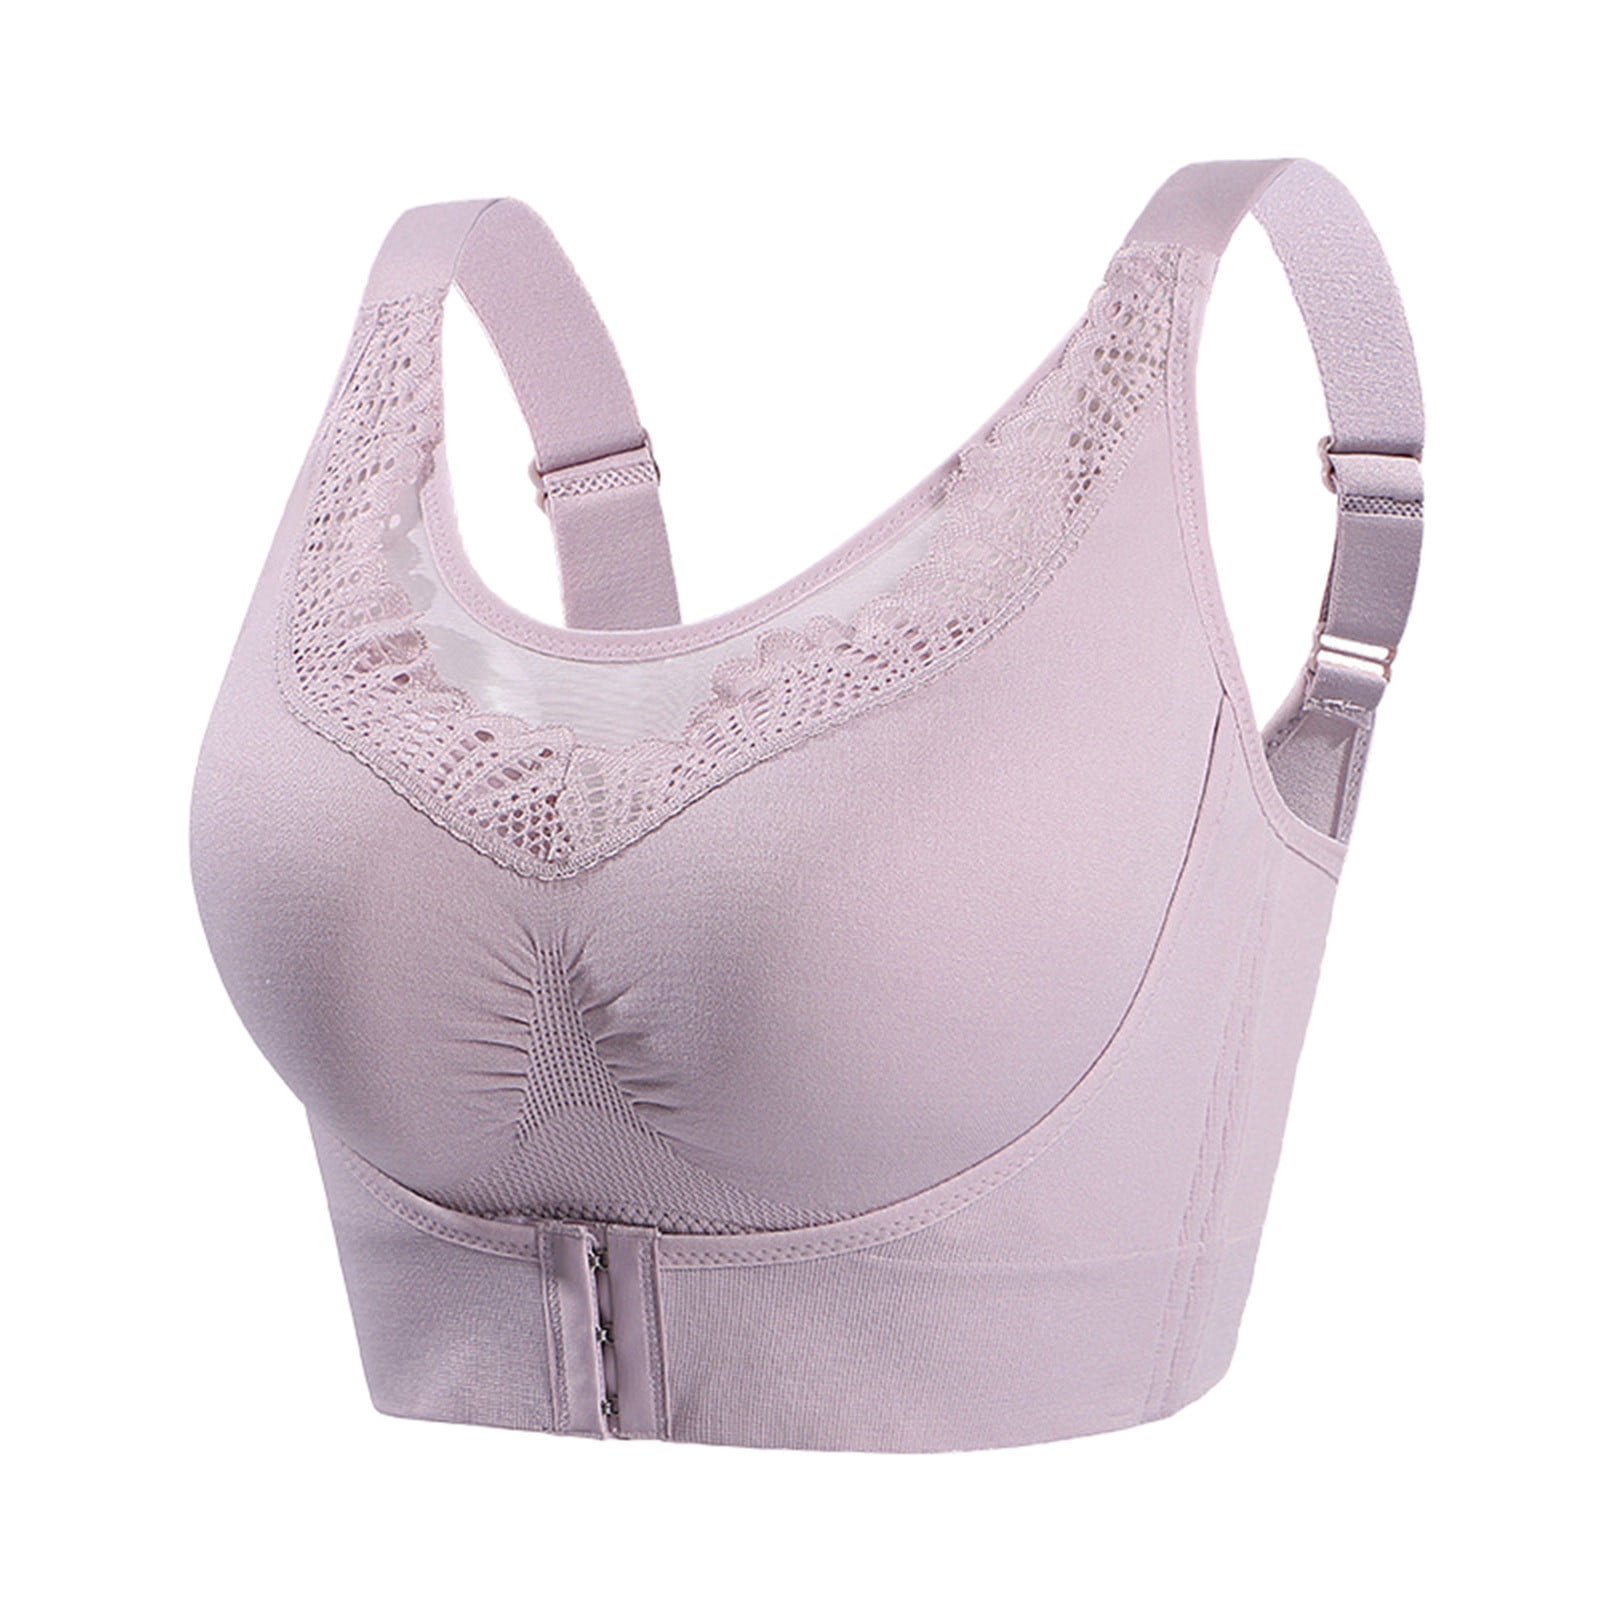 Women Large Size Front Closure Support Sports Bras No Underwire ...